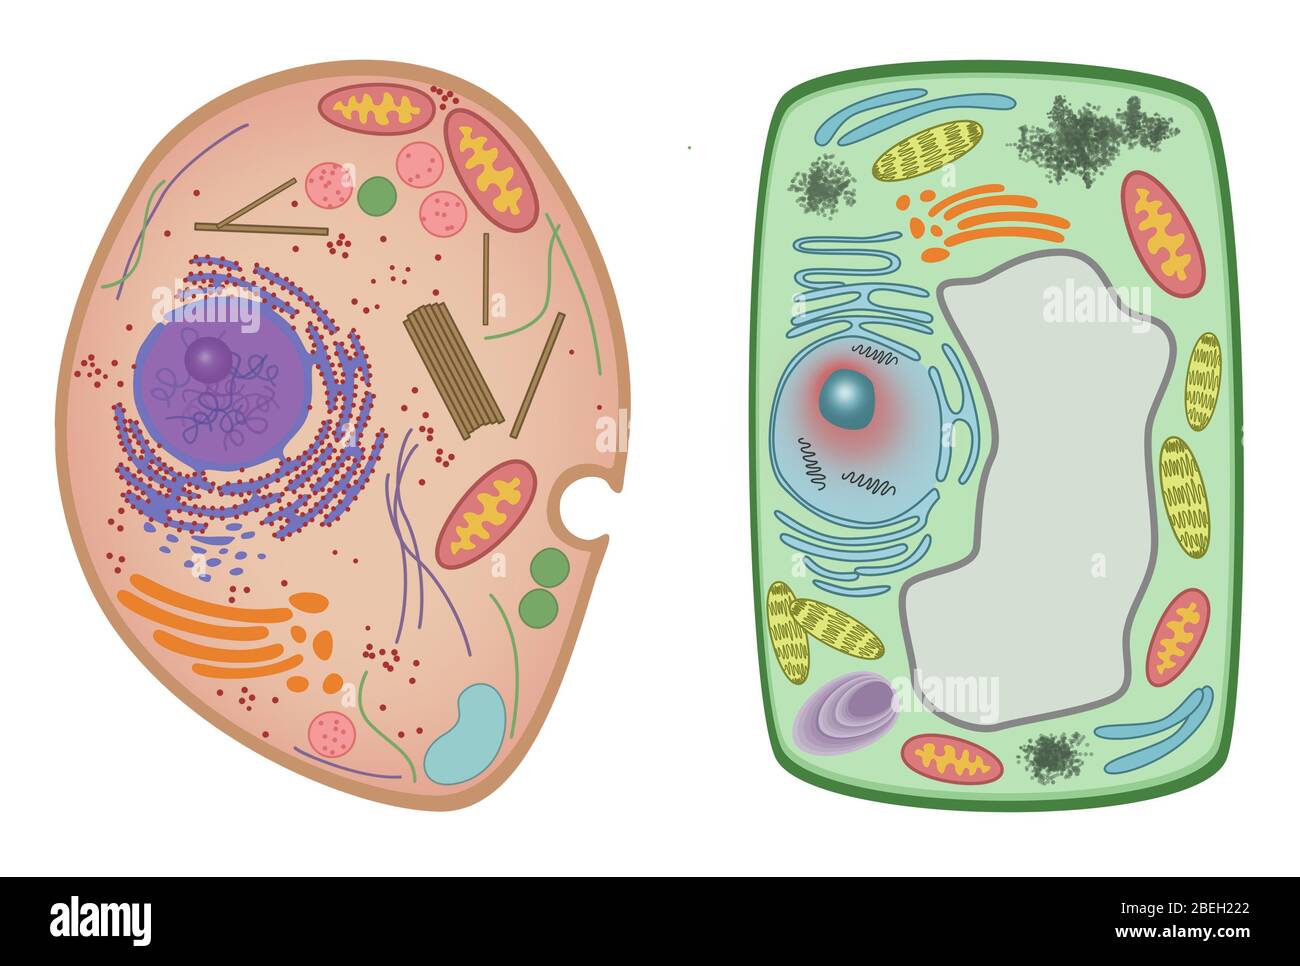 Animal Cell and Plant Cell Stock Photo